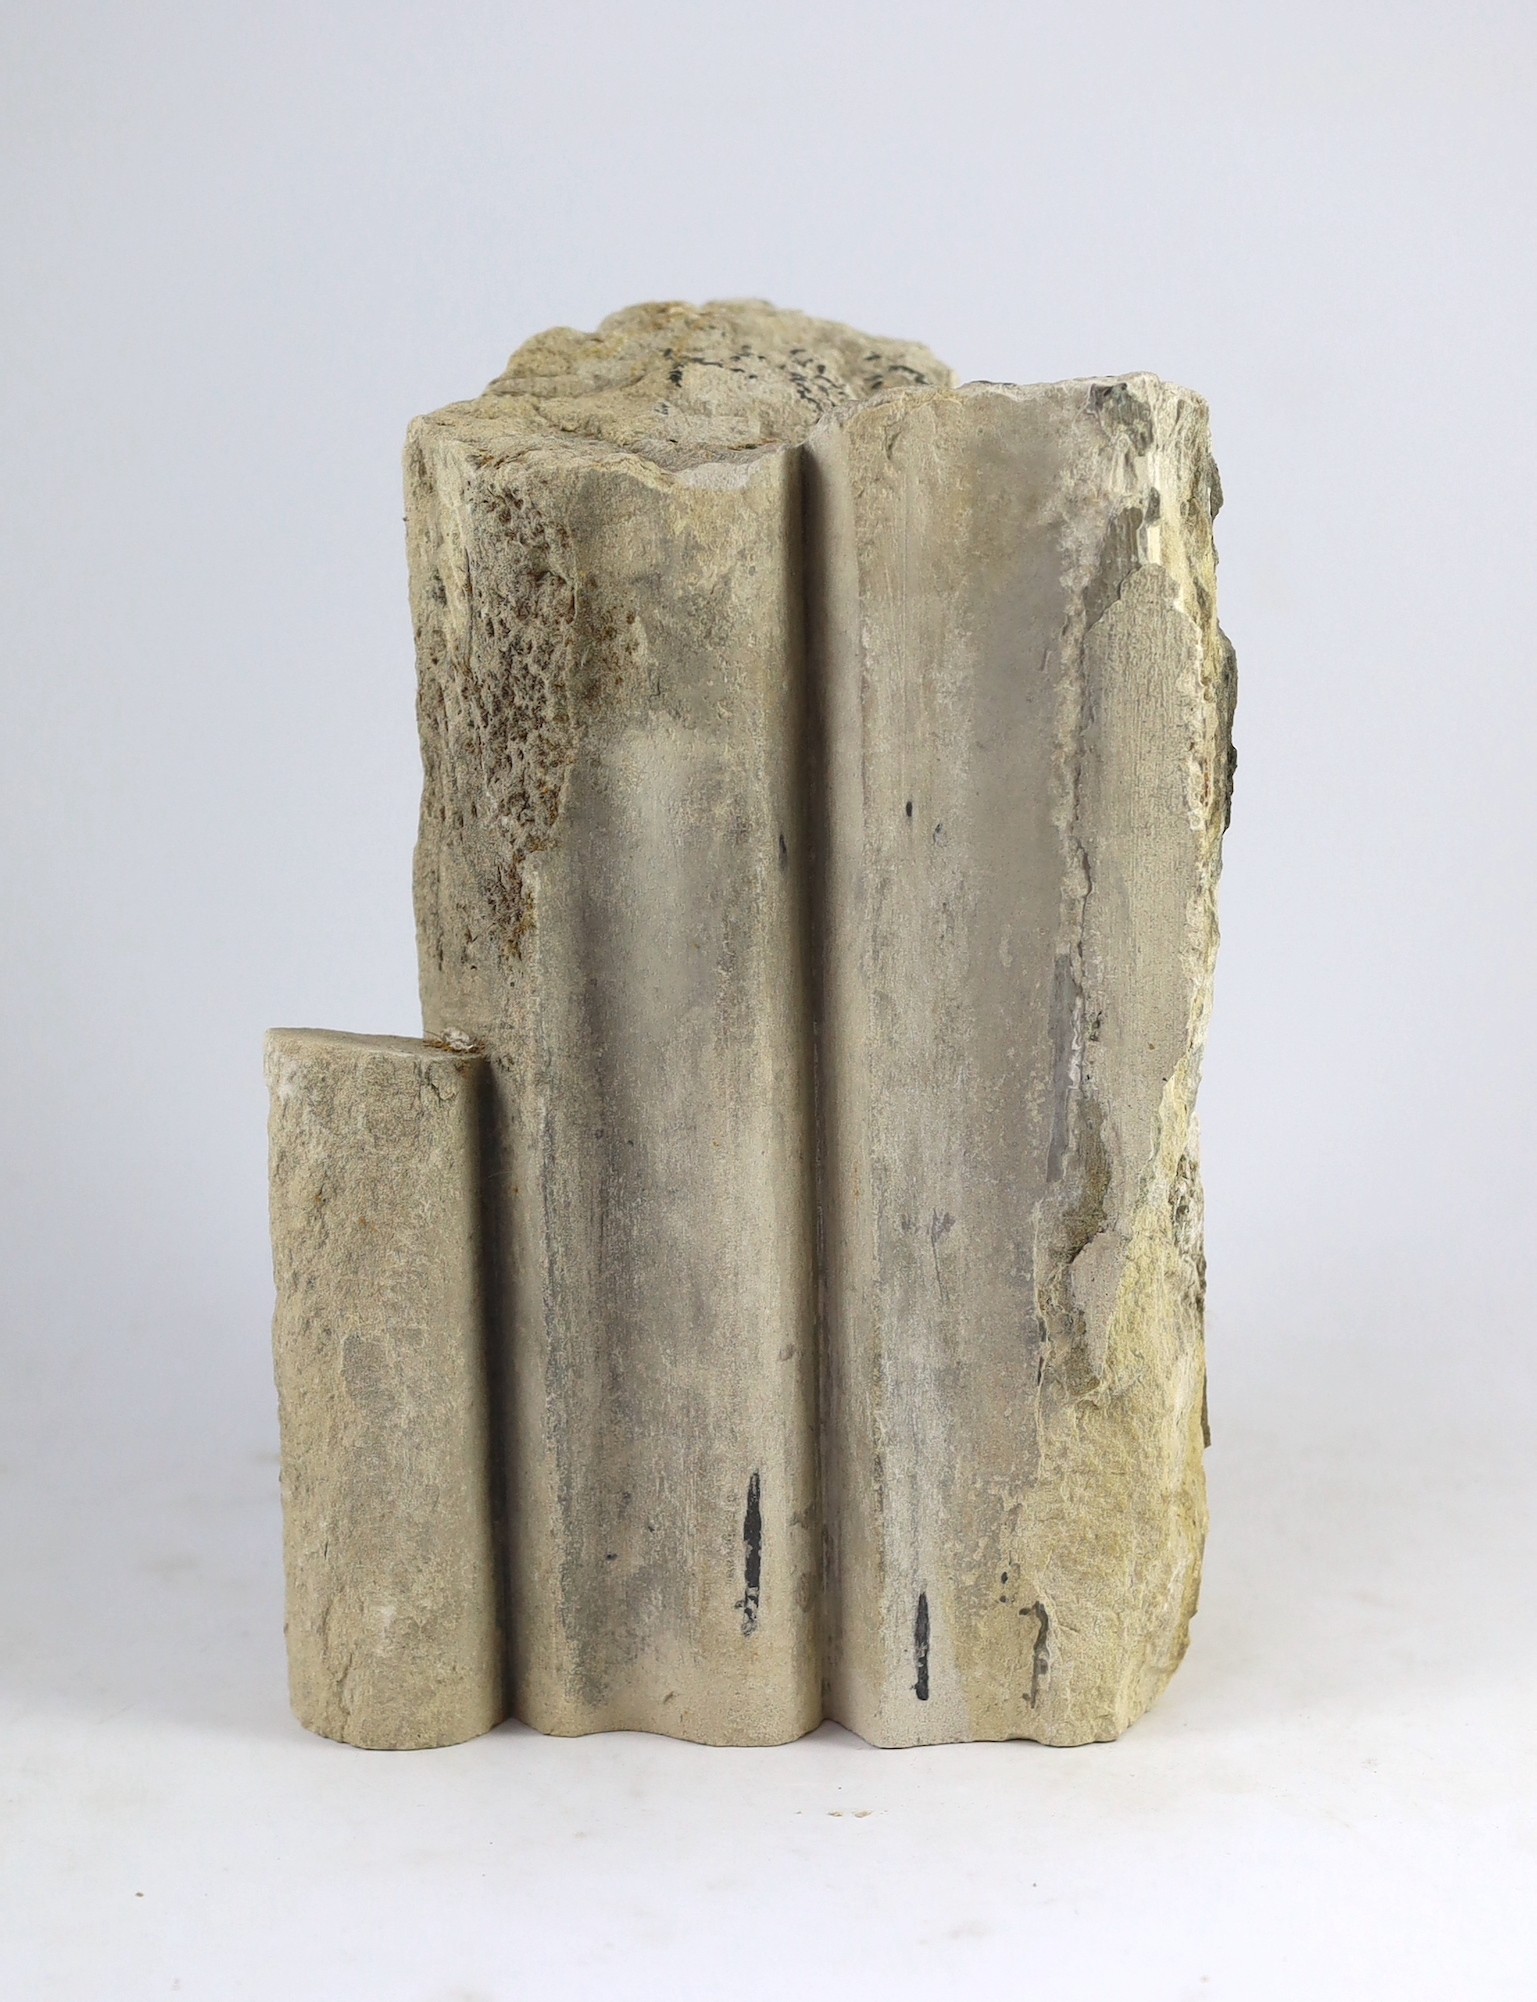 A section of Caen stone internal mullion from the Great South Window at Canterbury Cathedral circa 1428, 19cm wide 17cm deep 28.5cm high